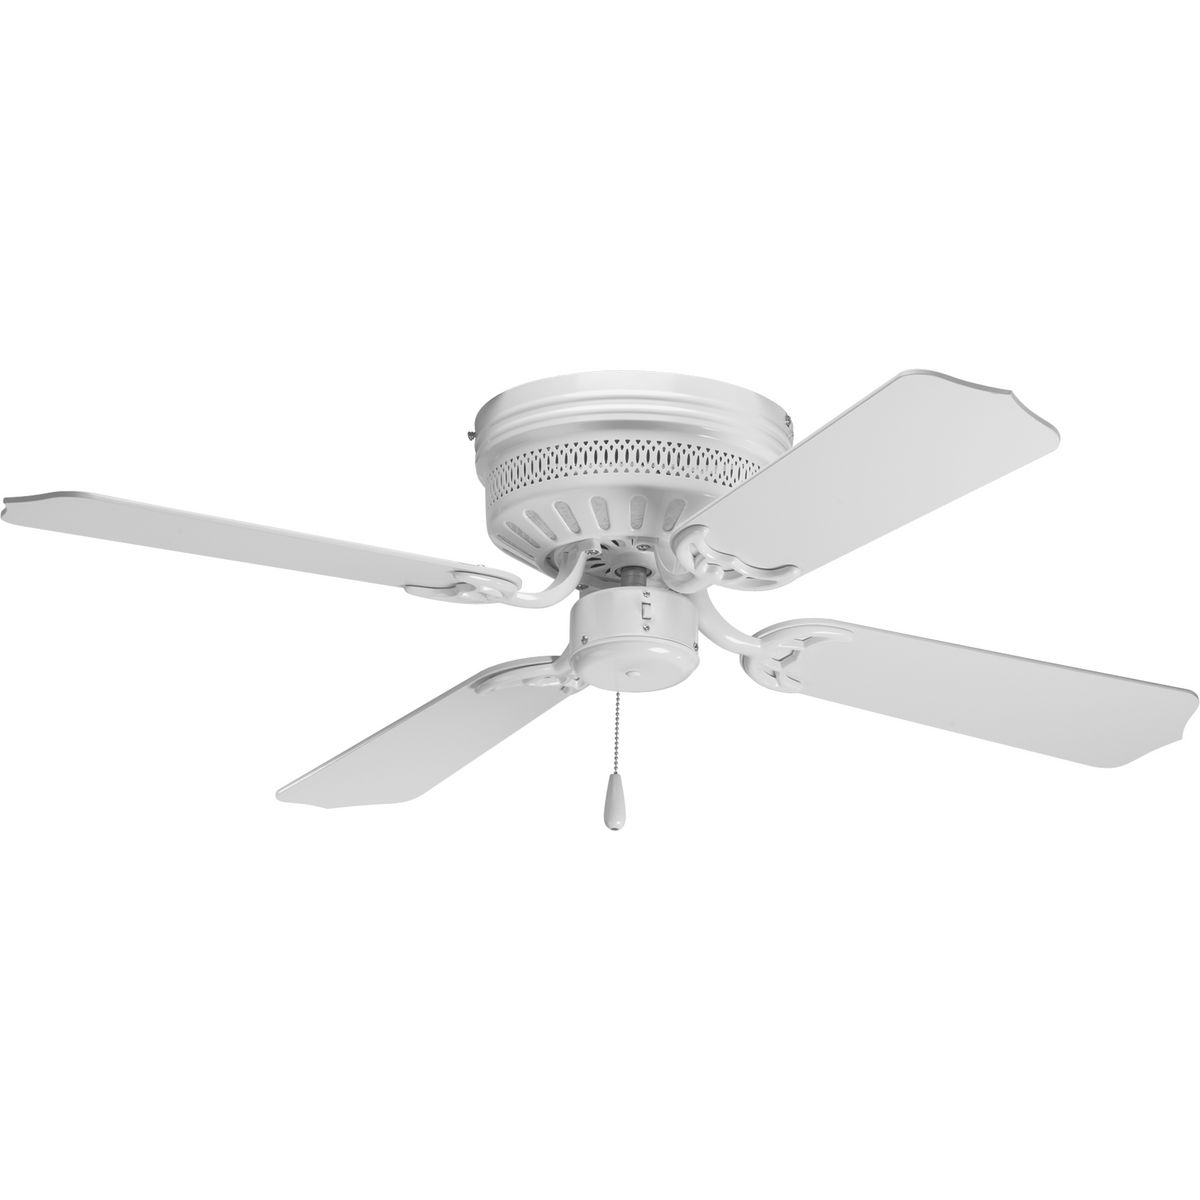 Airpro Collection 42 Four Blade Hugger Ceiling Fan P2524 30